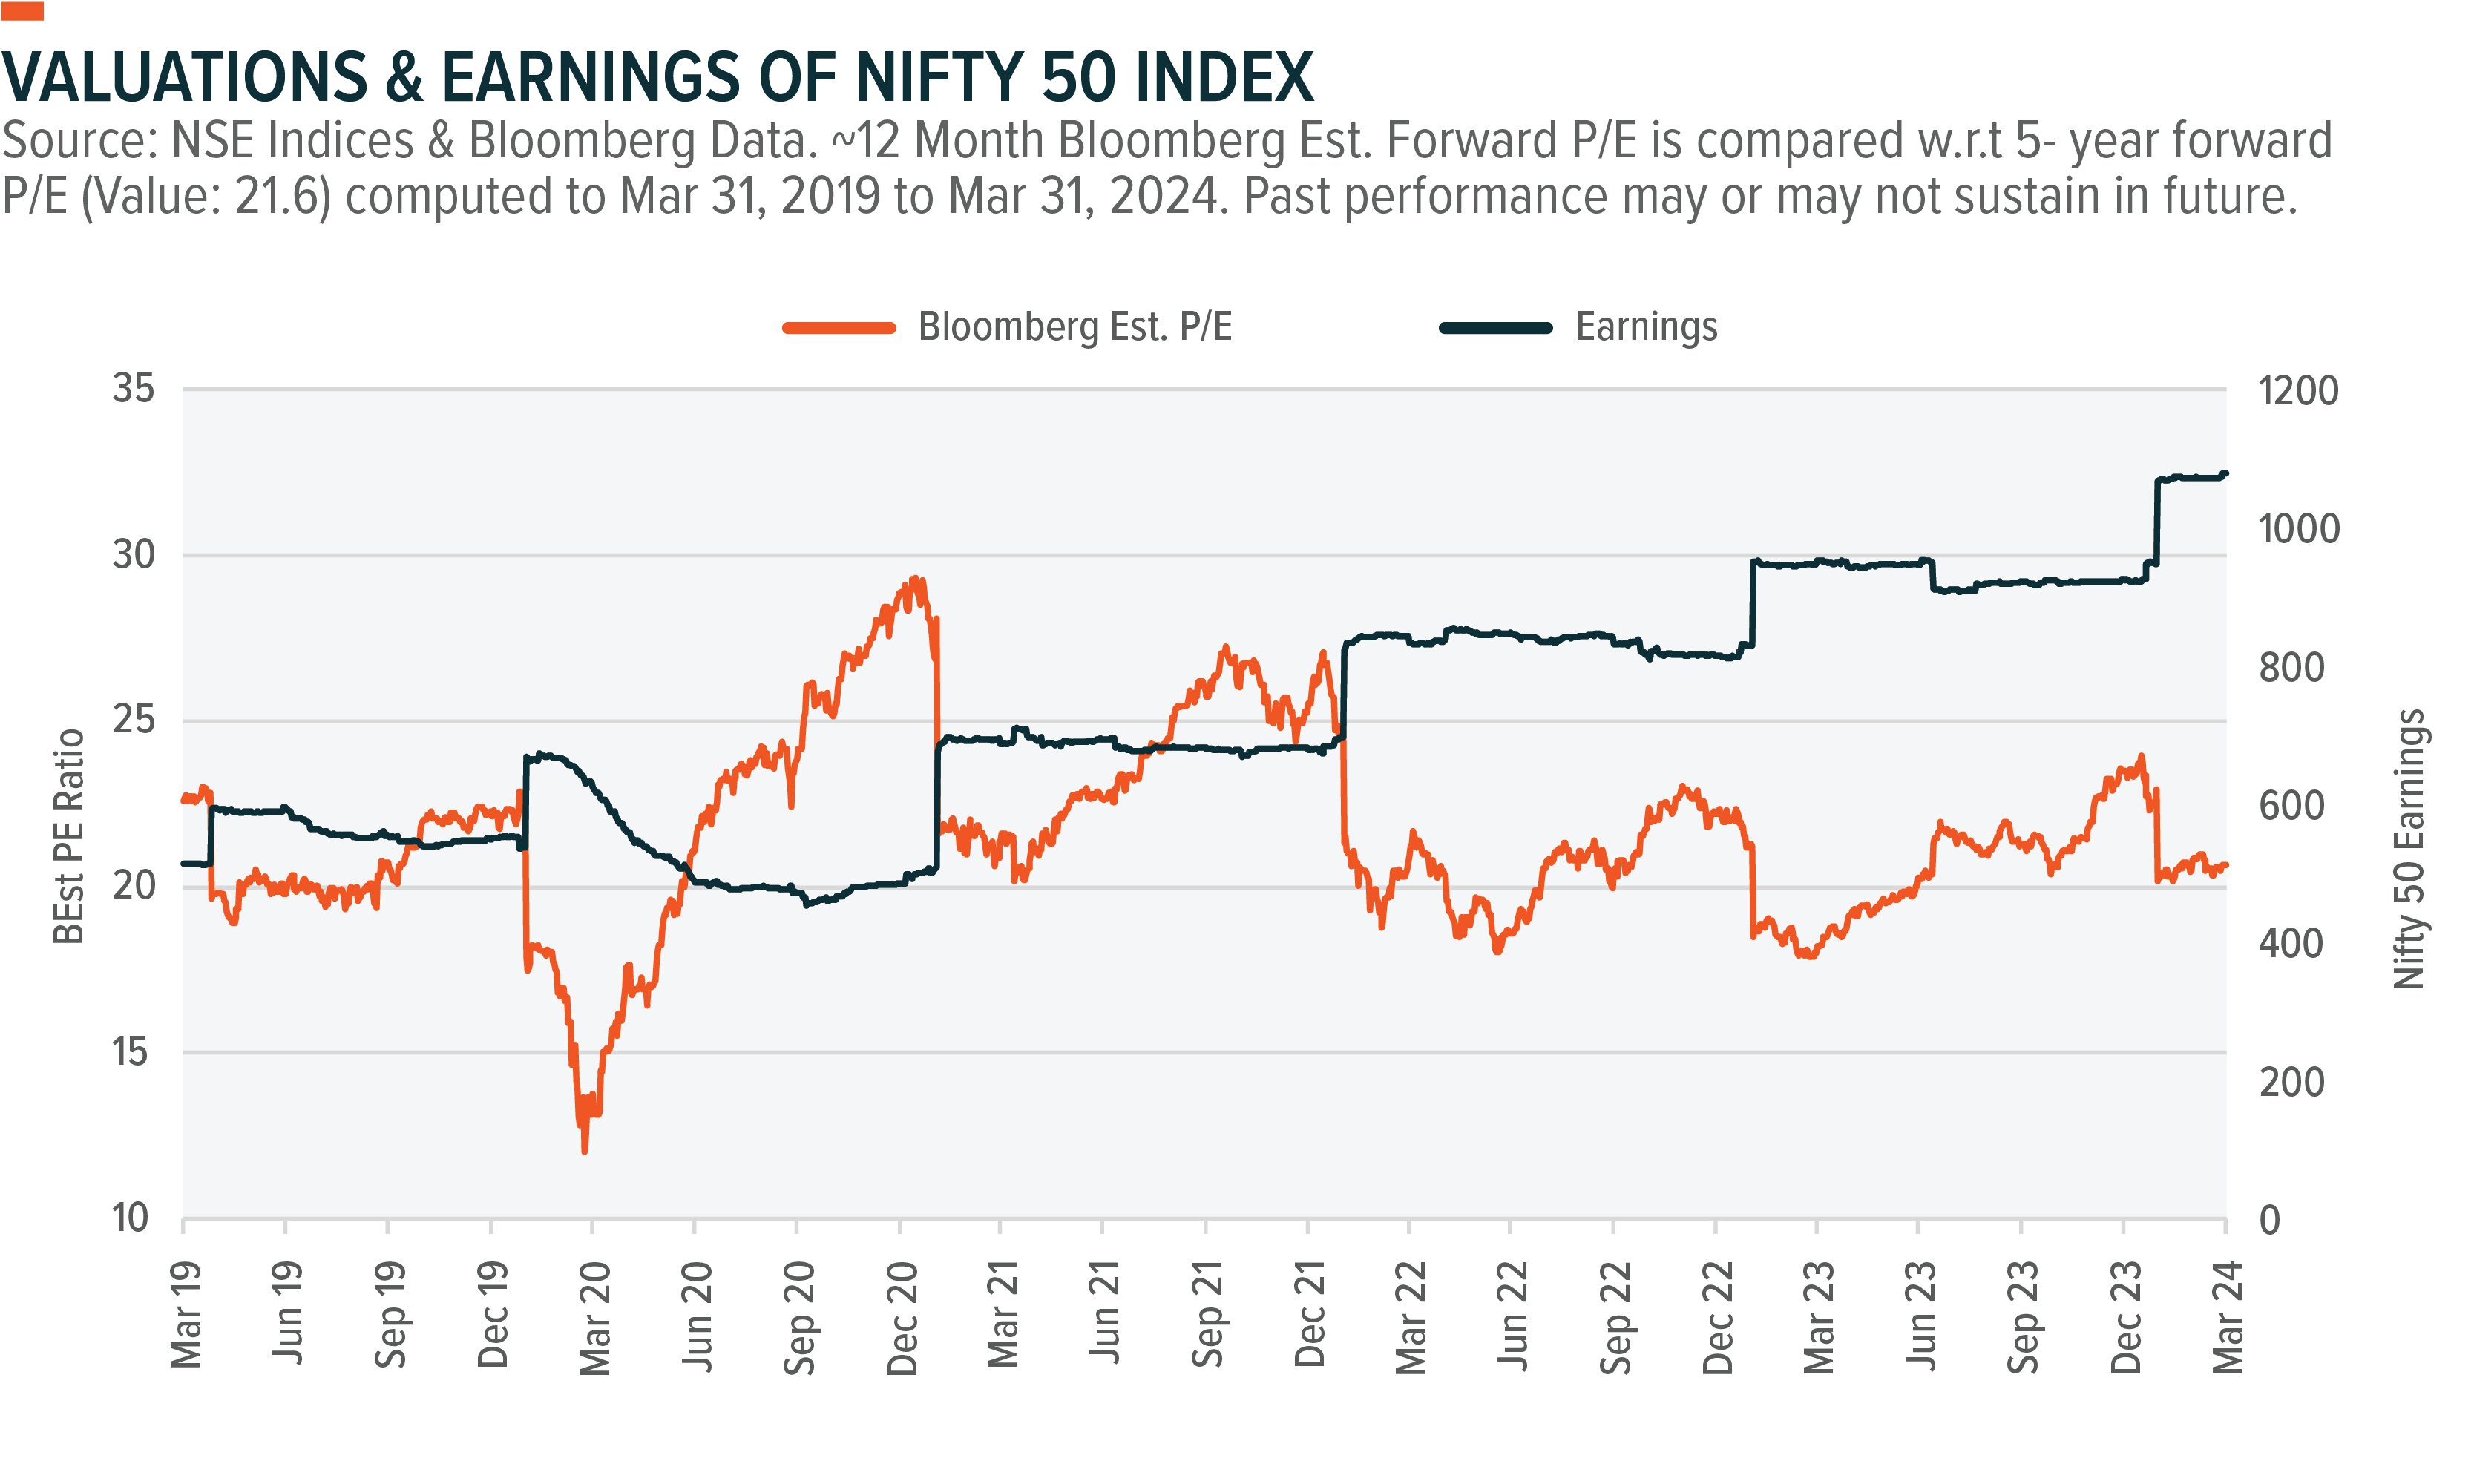 Graph: Valuations and Earnings of the Nifty50 Index